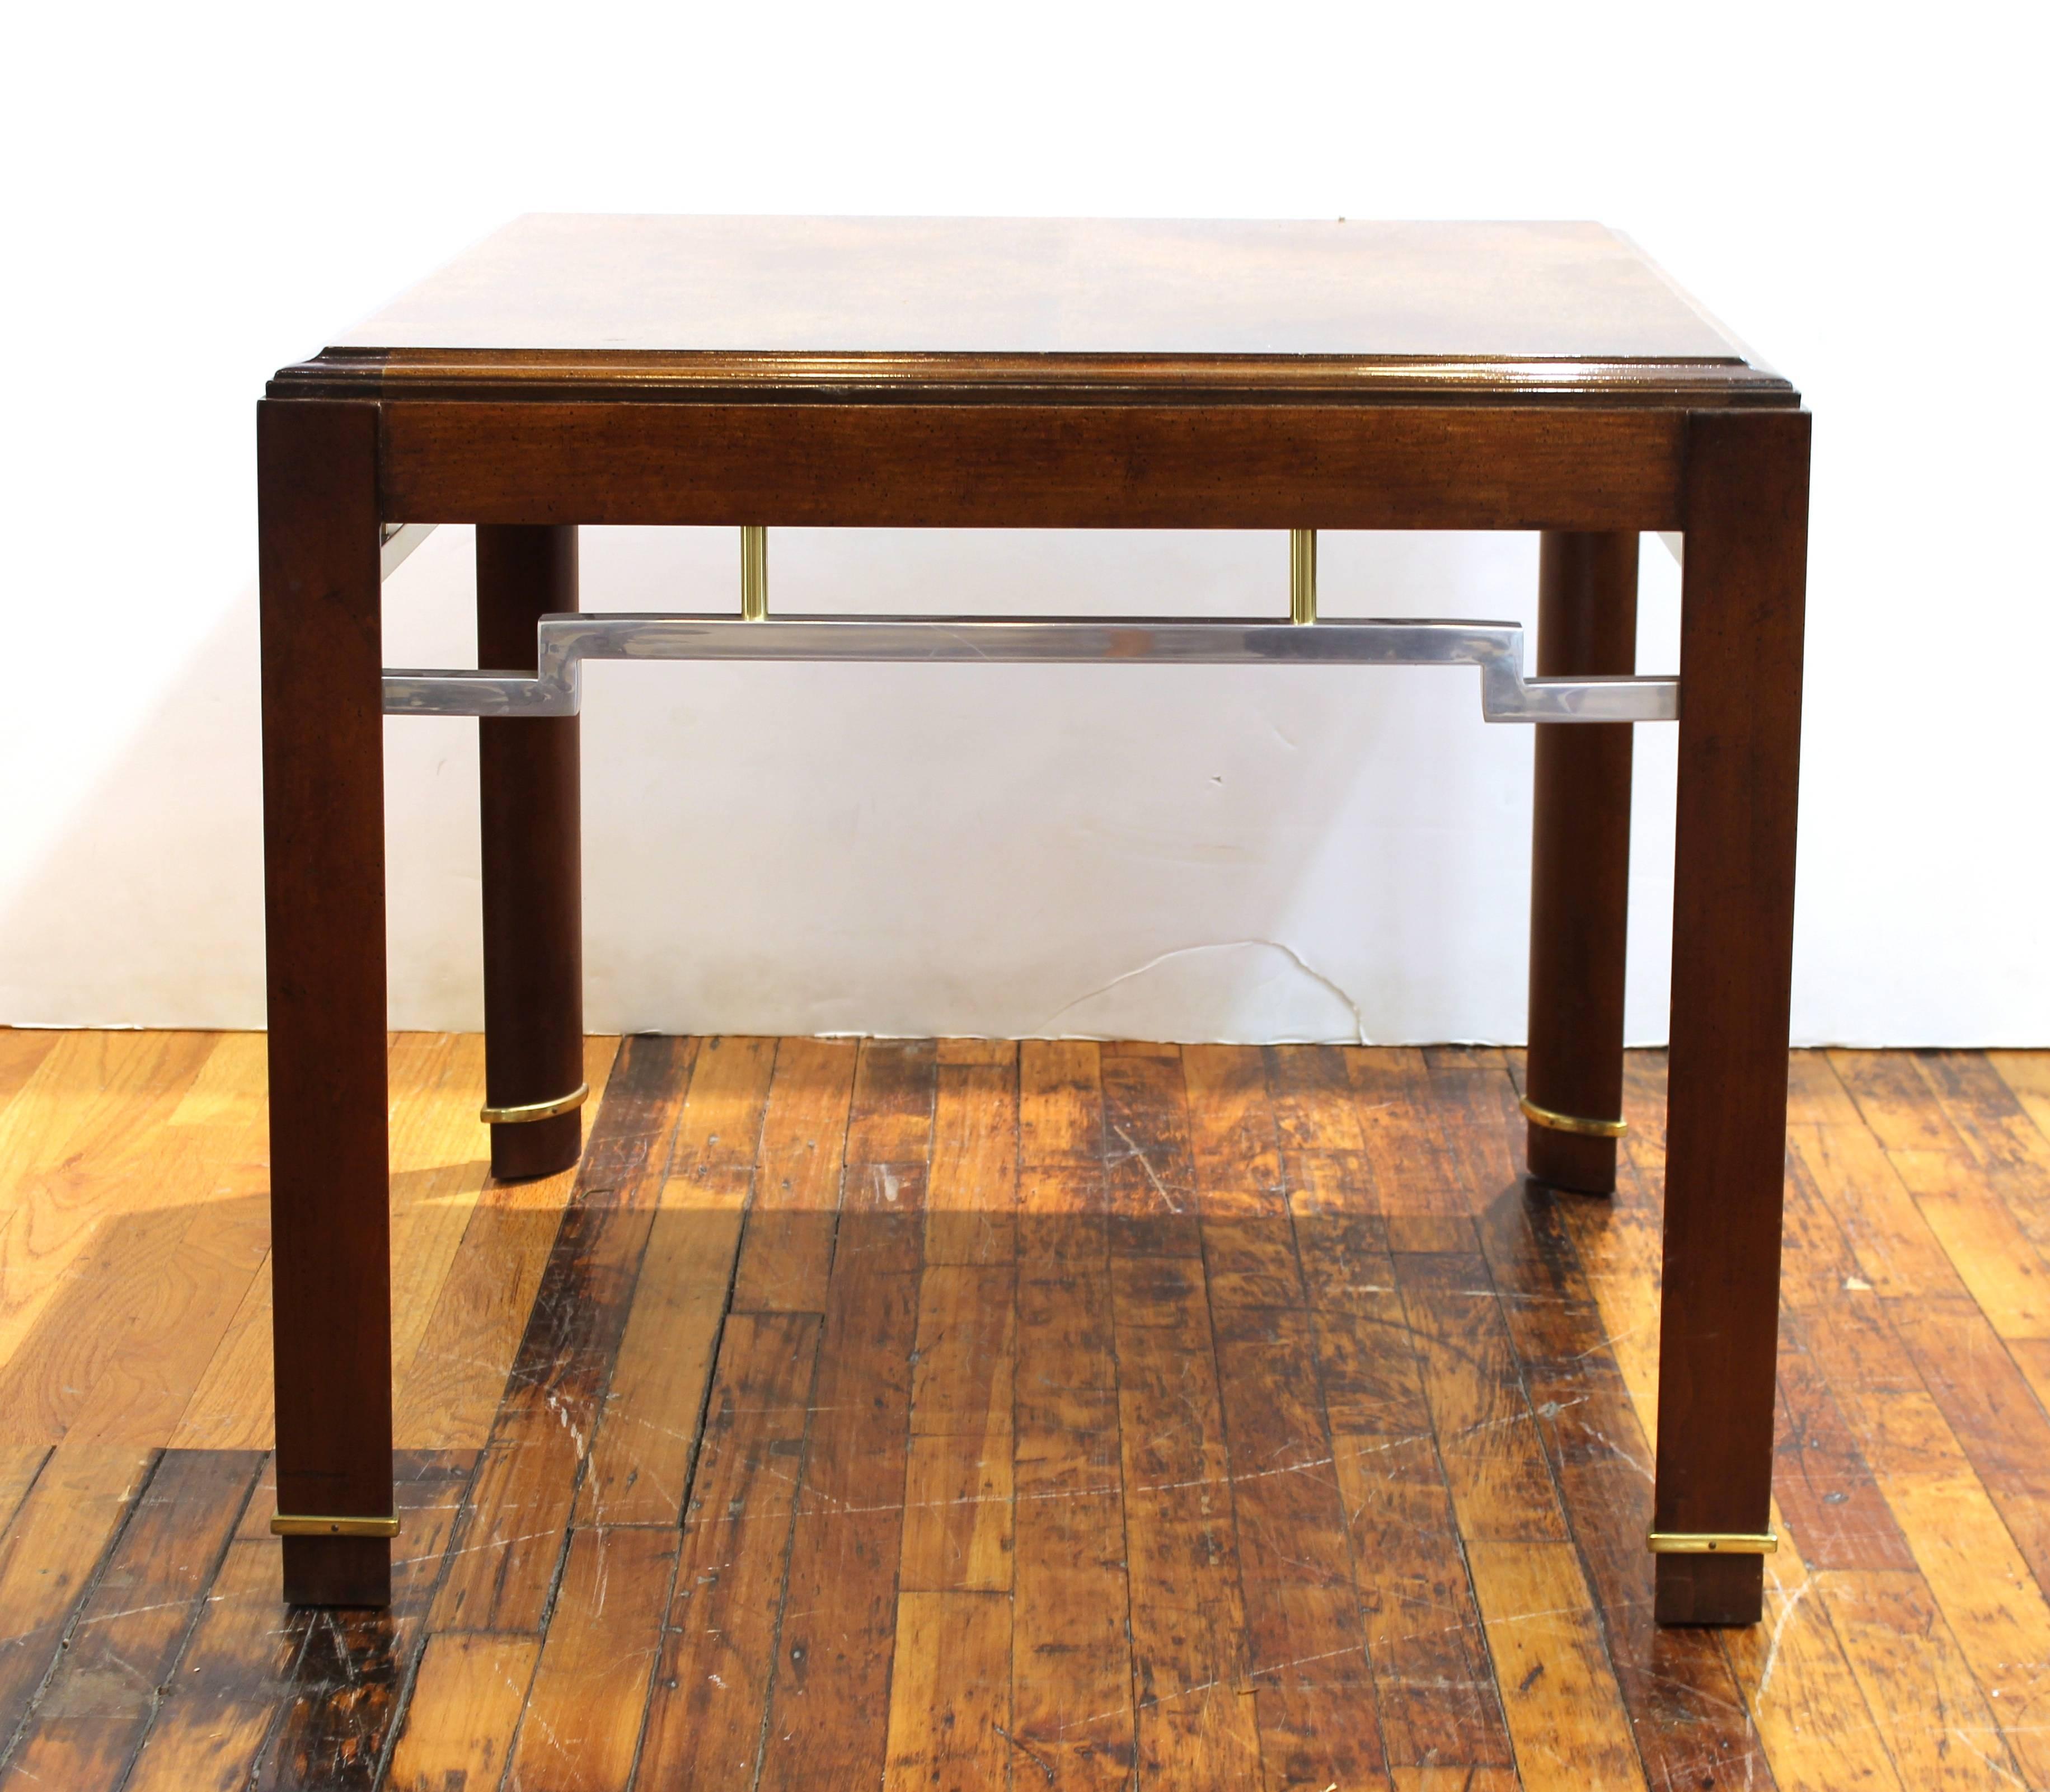 Asian inspired centre table or side table with wooden top and structure with metal embellishments. The piece has some scratches to the legs and dents to the top.